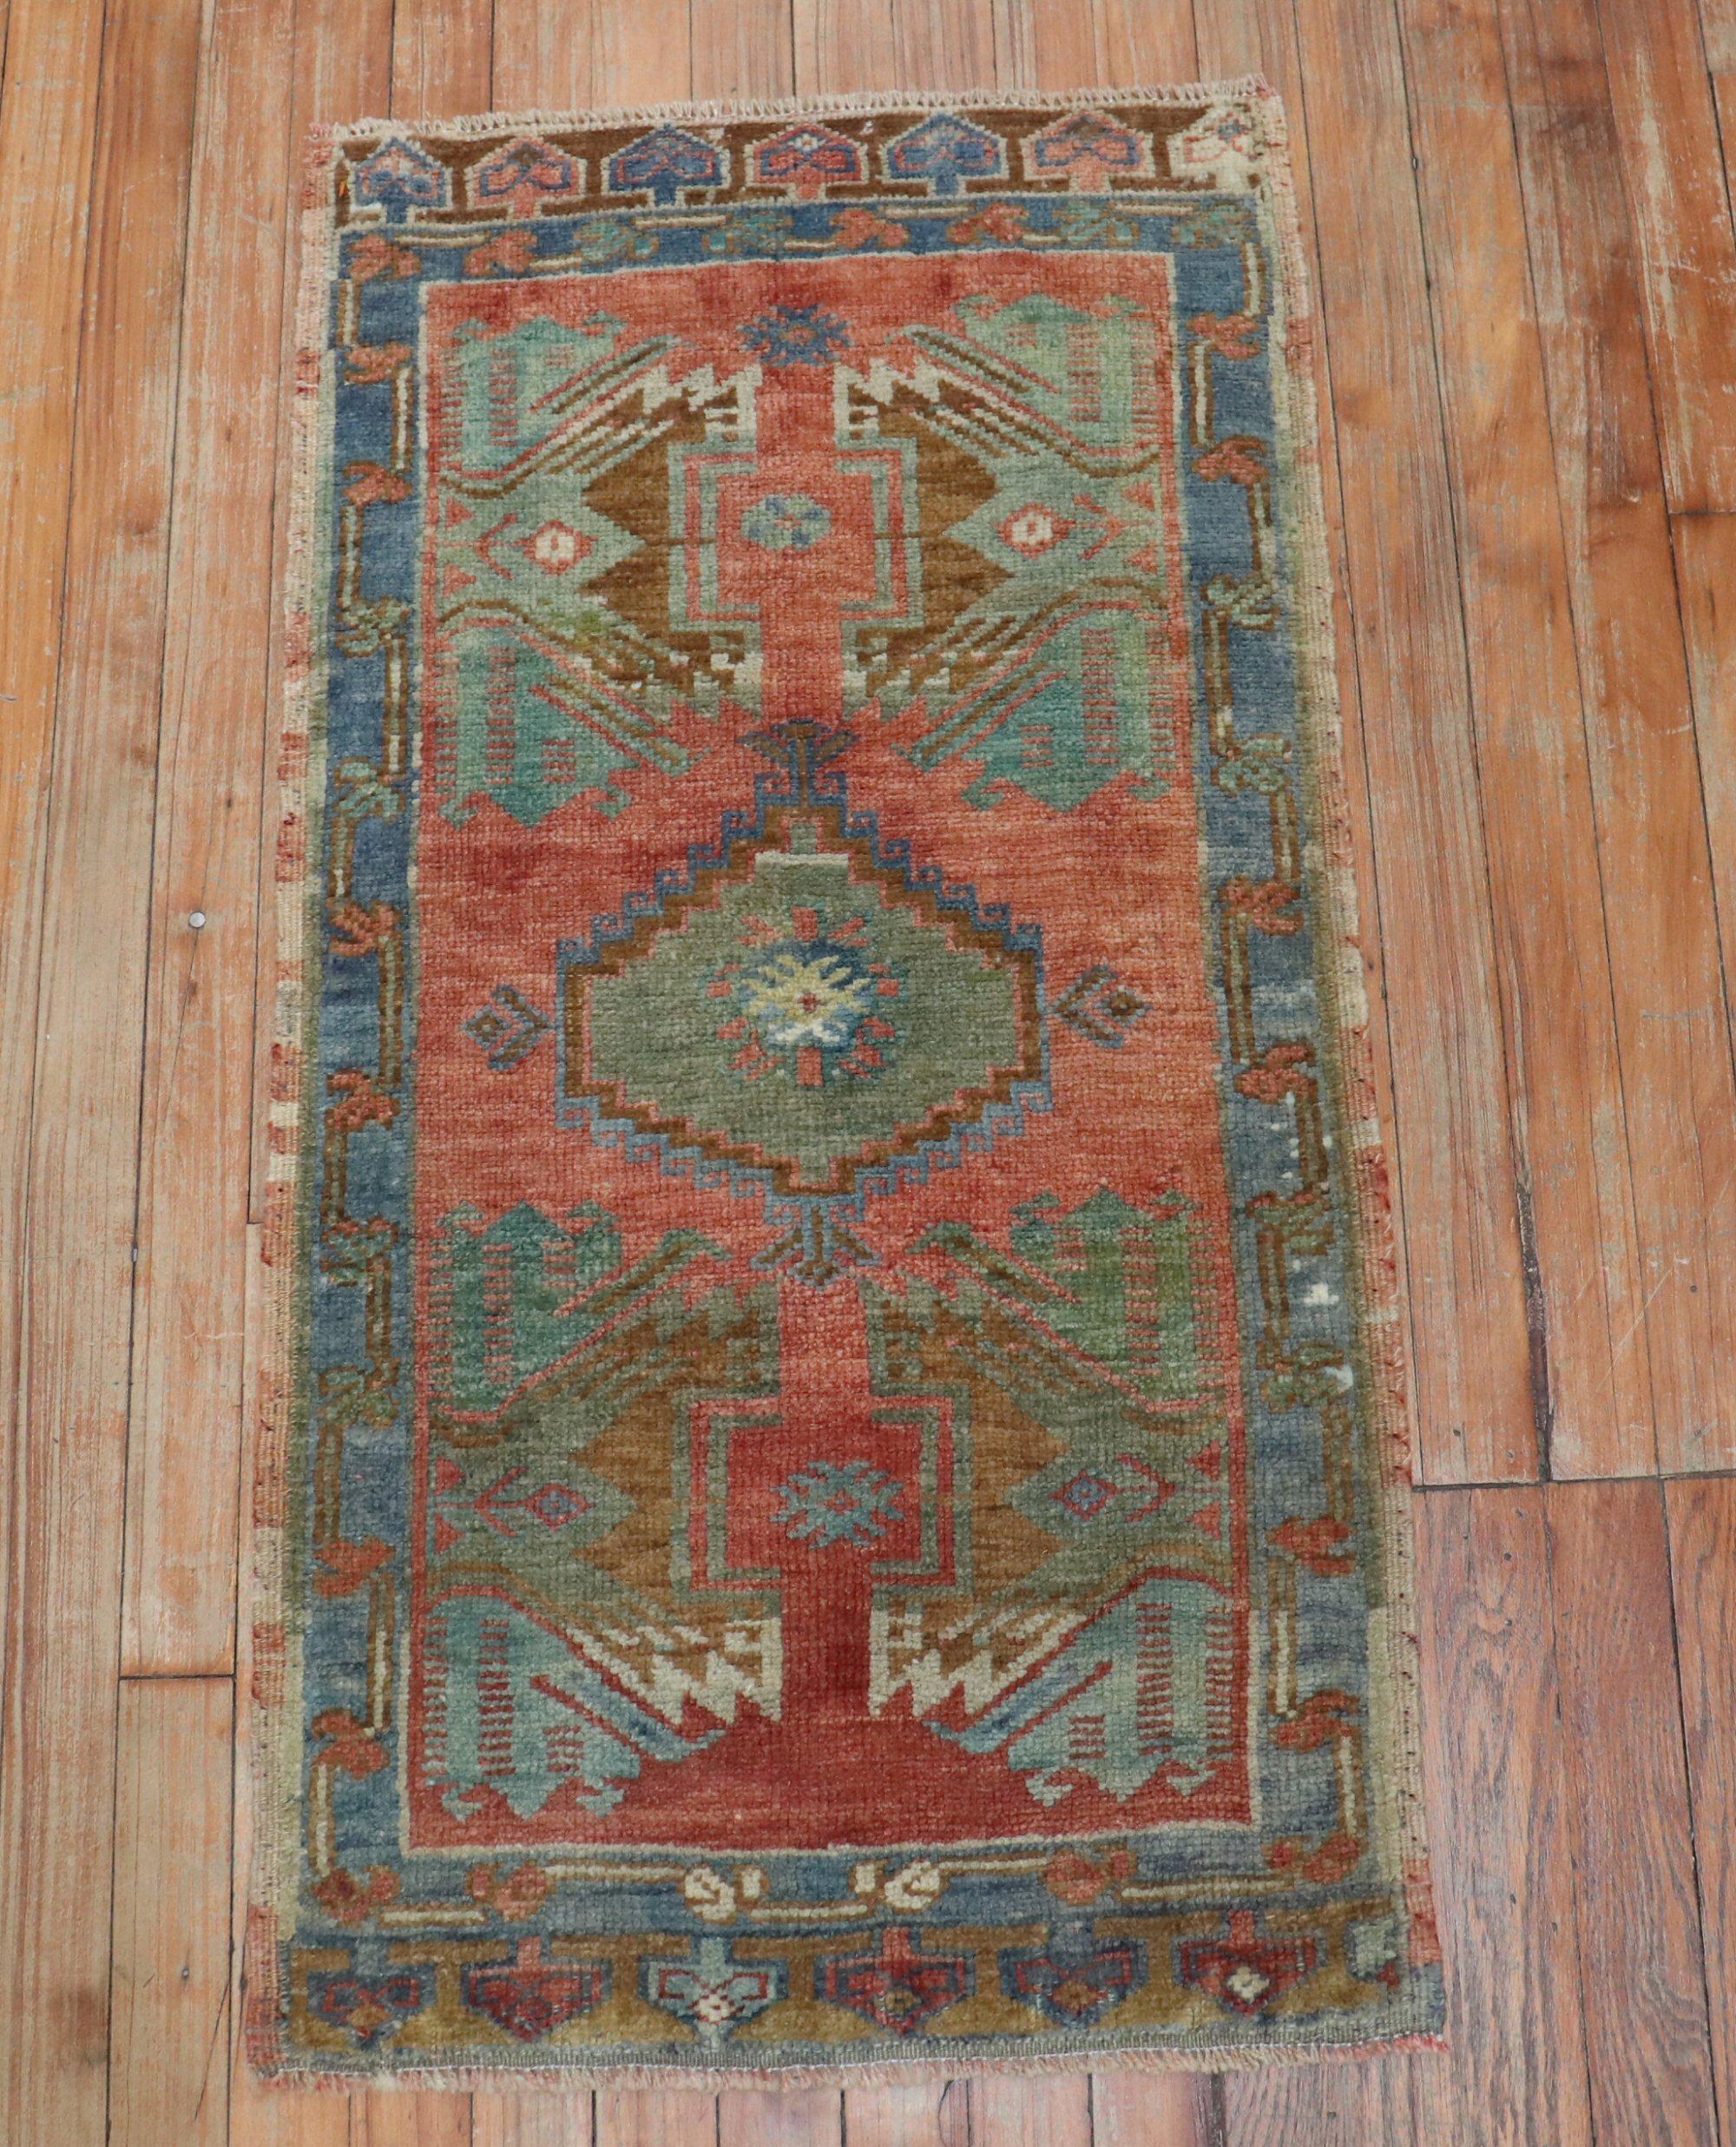 Vintage Turkish Yastik Rug with green and gray accents on a brick color field

Measures: 22” x 42”.